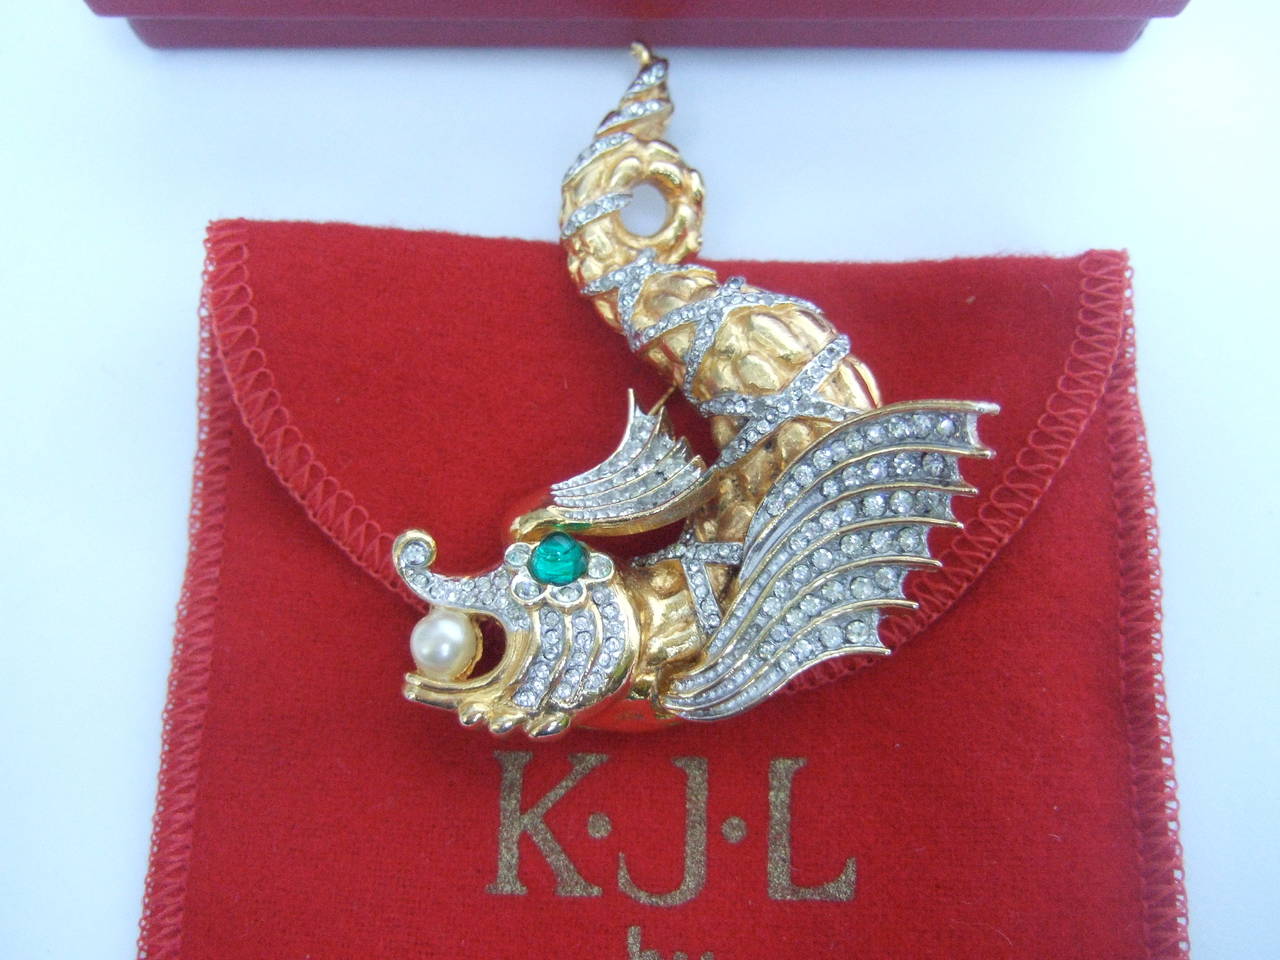 Ken Lane Jeweled crystal fish brooch 
The ornate figural brooch is encrusted with glittering pave crystals
The fish's eye is embellished with an emerald green glass cabochon
The fish is designed with a lustrous faux enamel pearl embedded 
in its